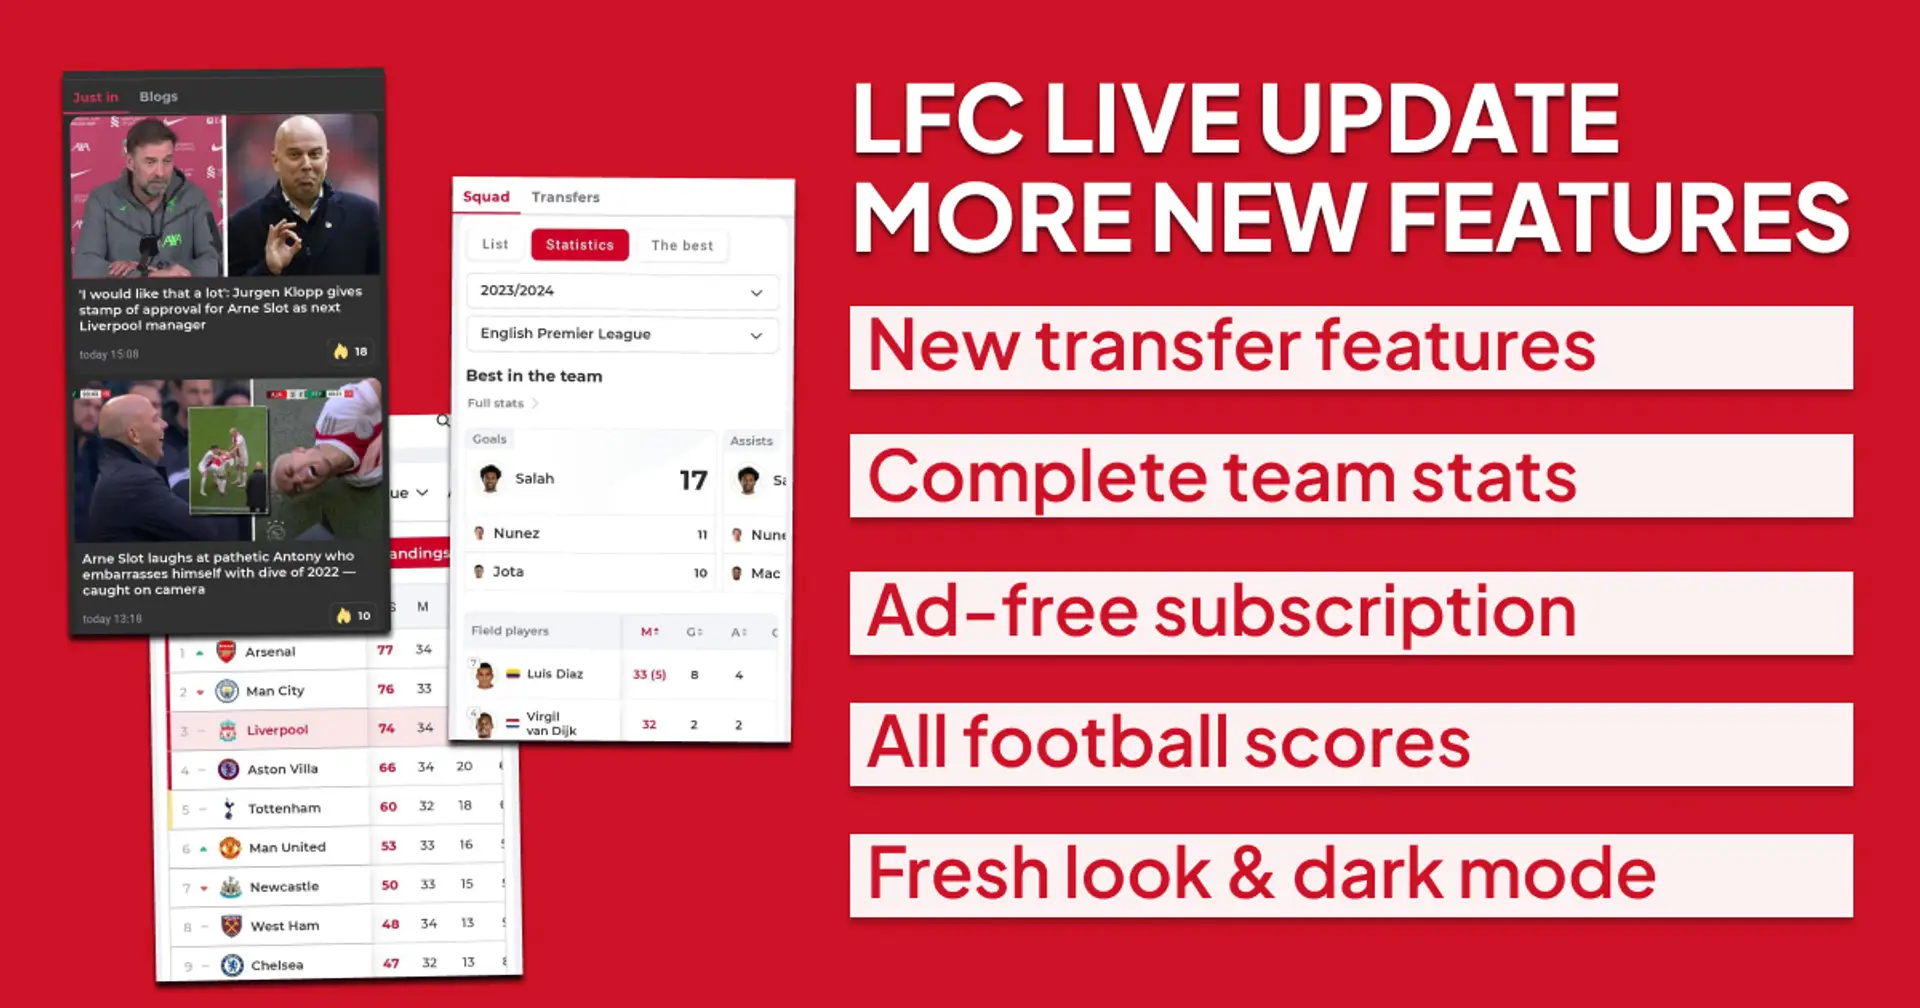 🐣 Premium ad-free subscription, all football scores, transfer content & more new features in app UPDATE